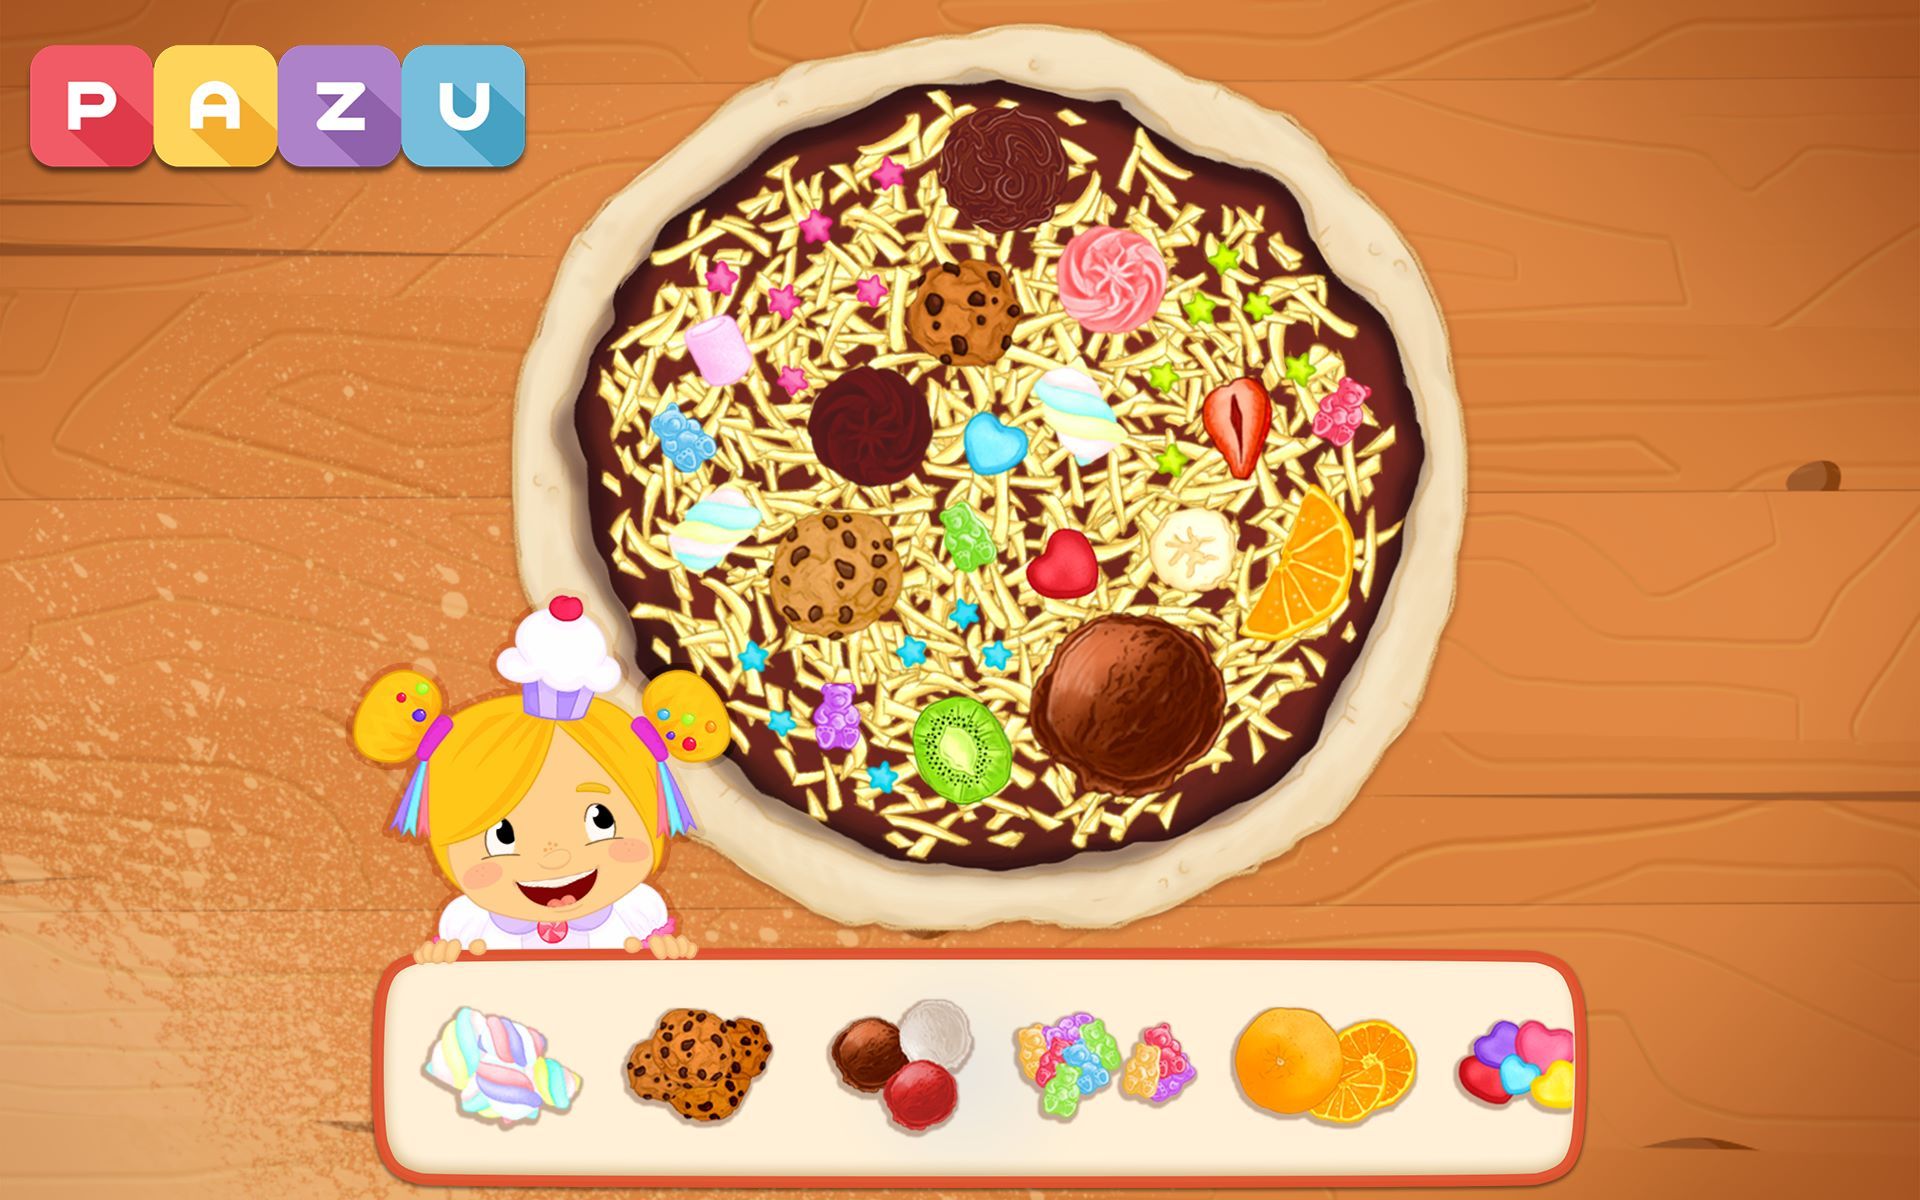 Pizza maker - cooking and baking games for kids